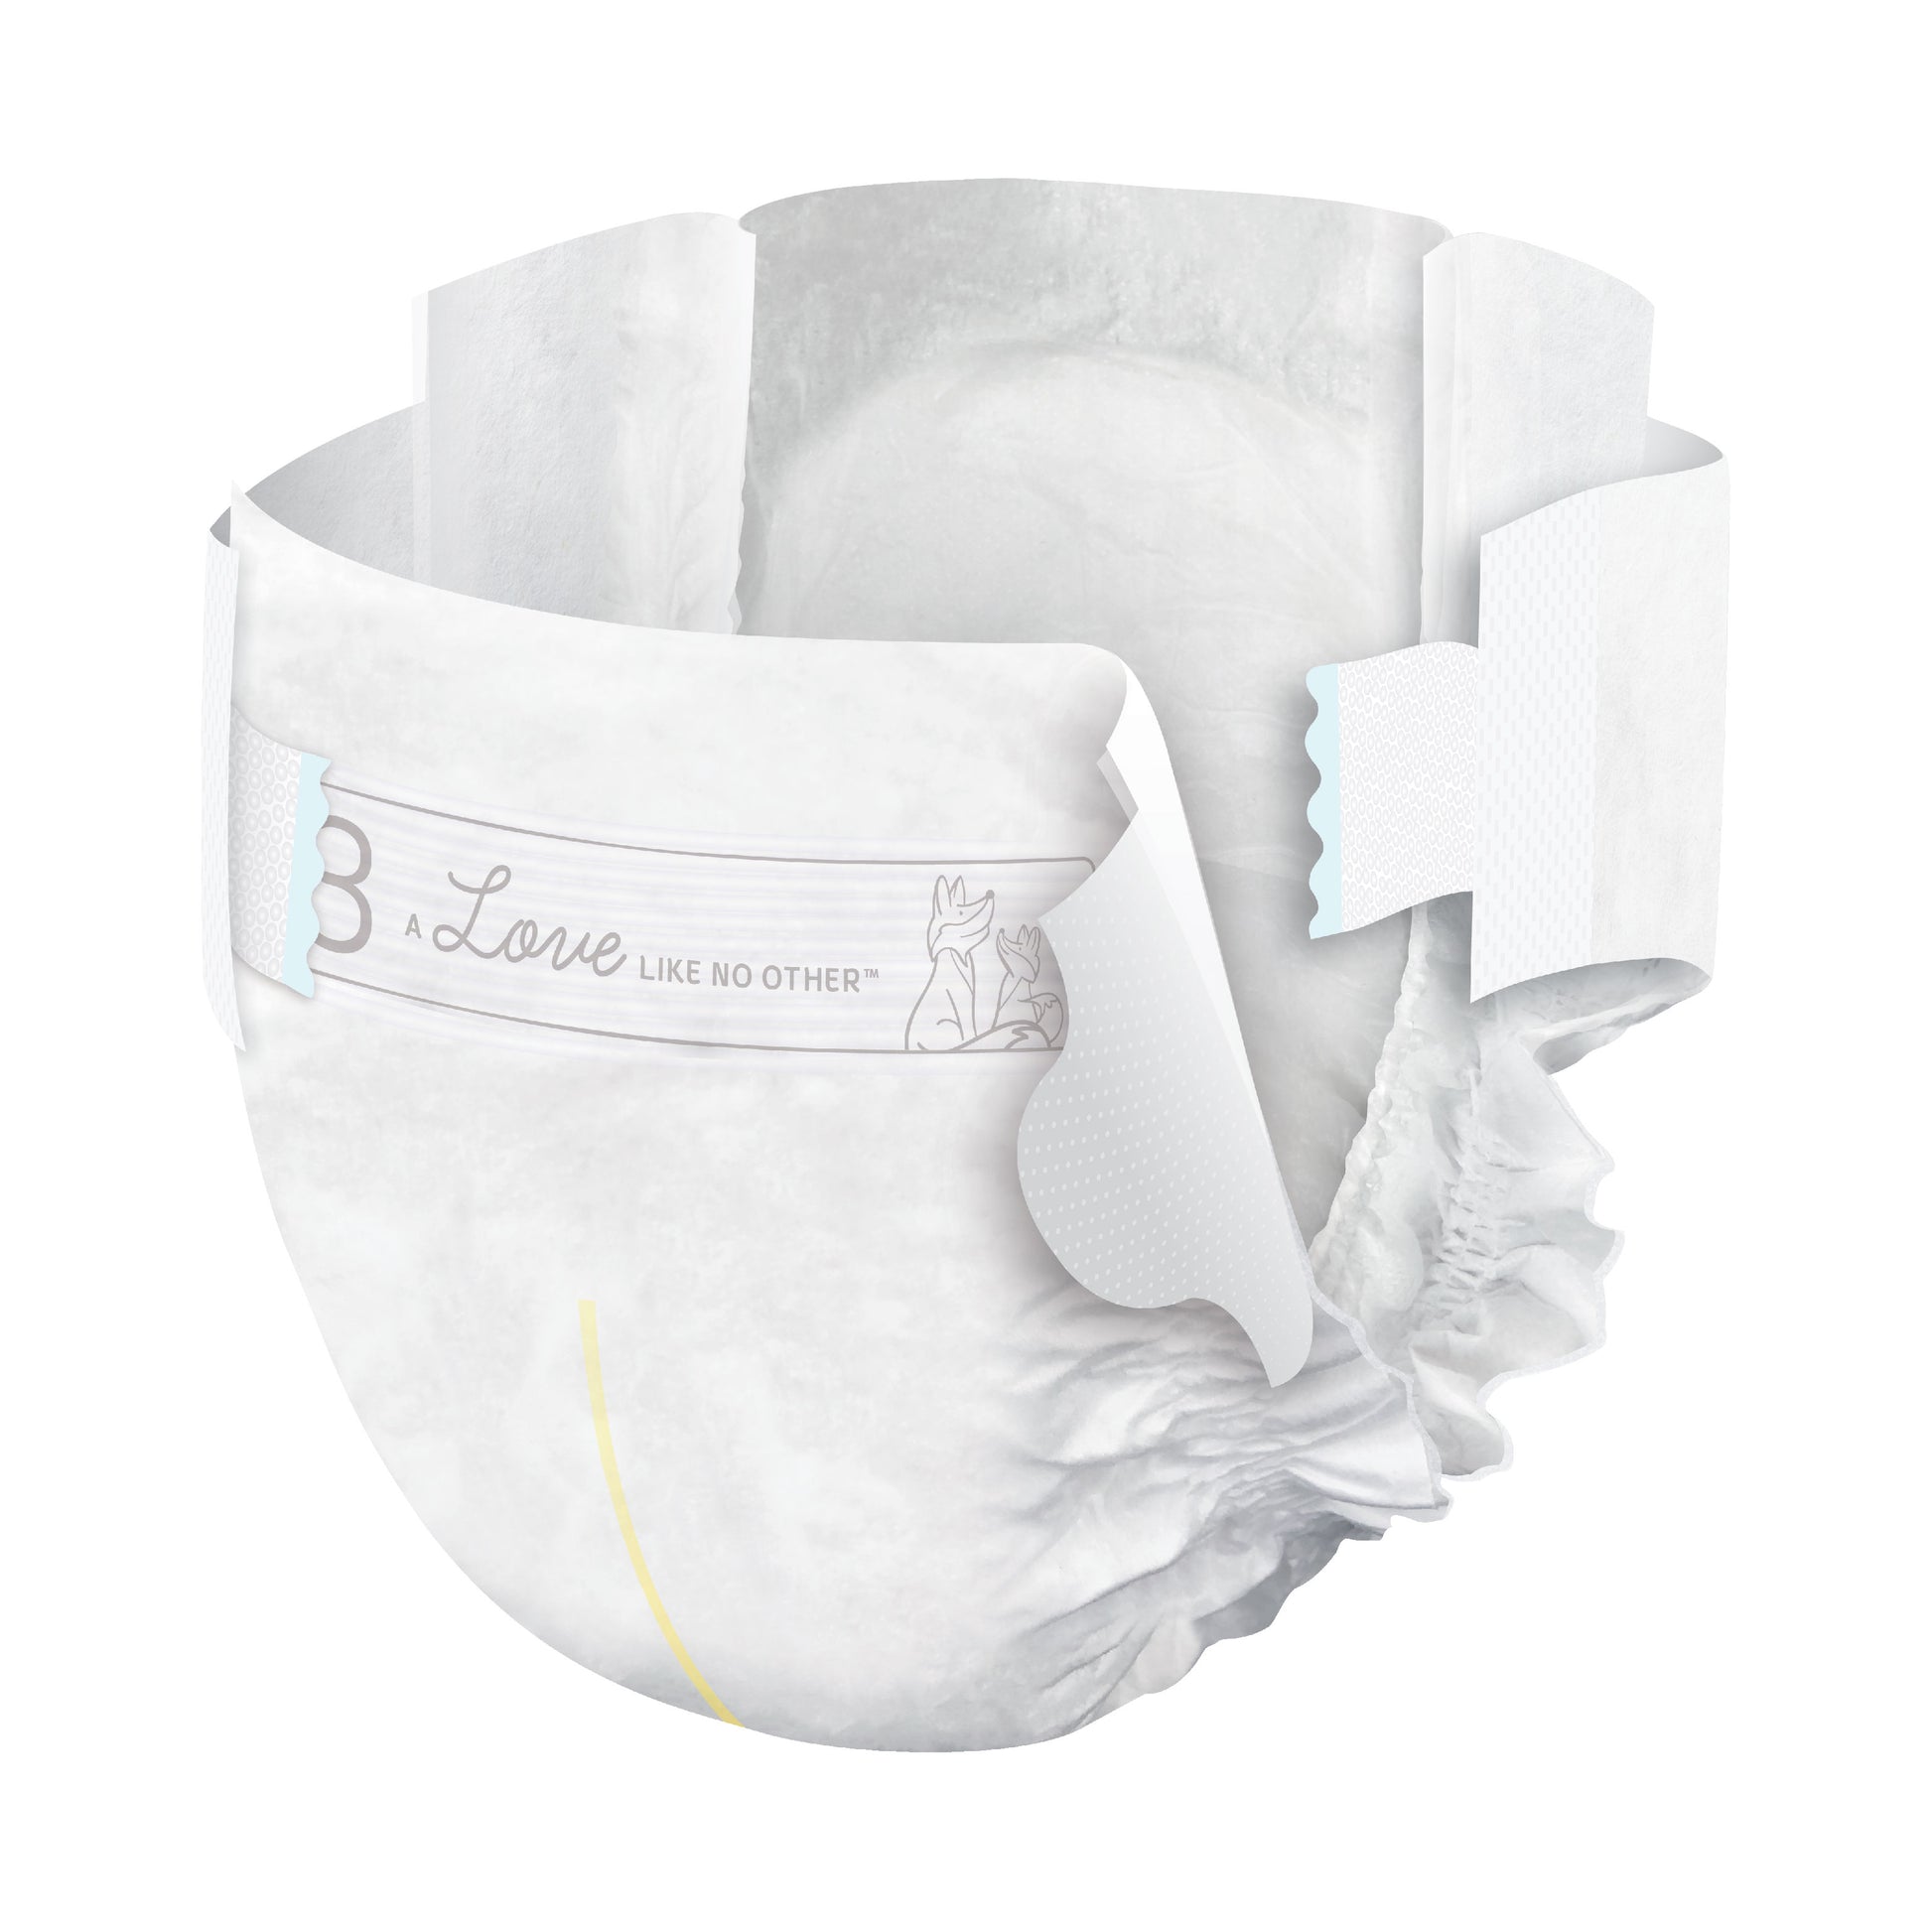 Buy Non-Irritating goodnight diapers xl at Amazing Prices 